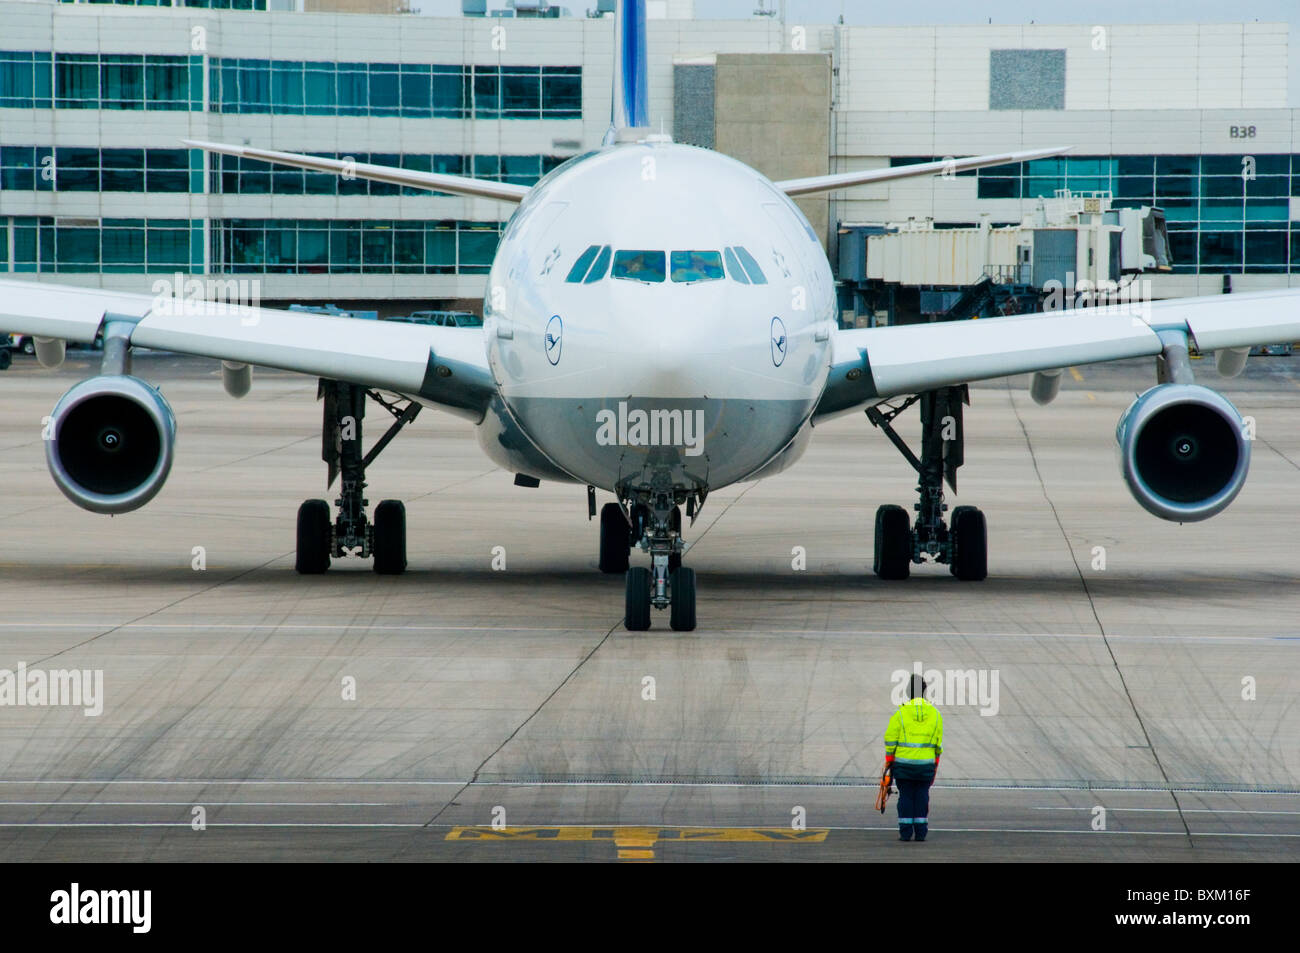 Airplane at airport gate sitting on tarmac being fueled and serviced for departure Stock Photo